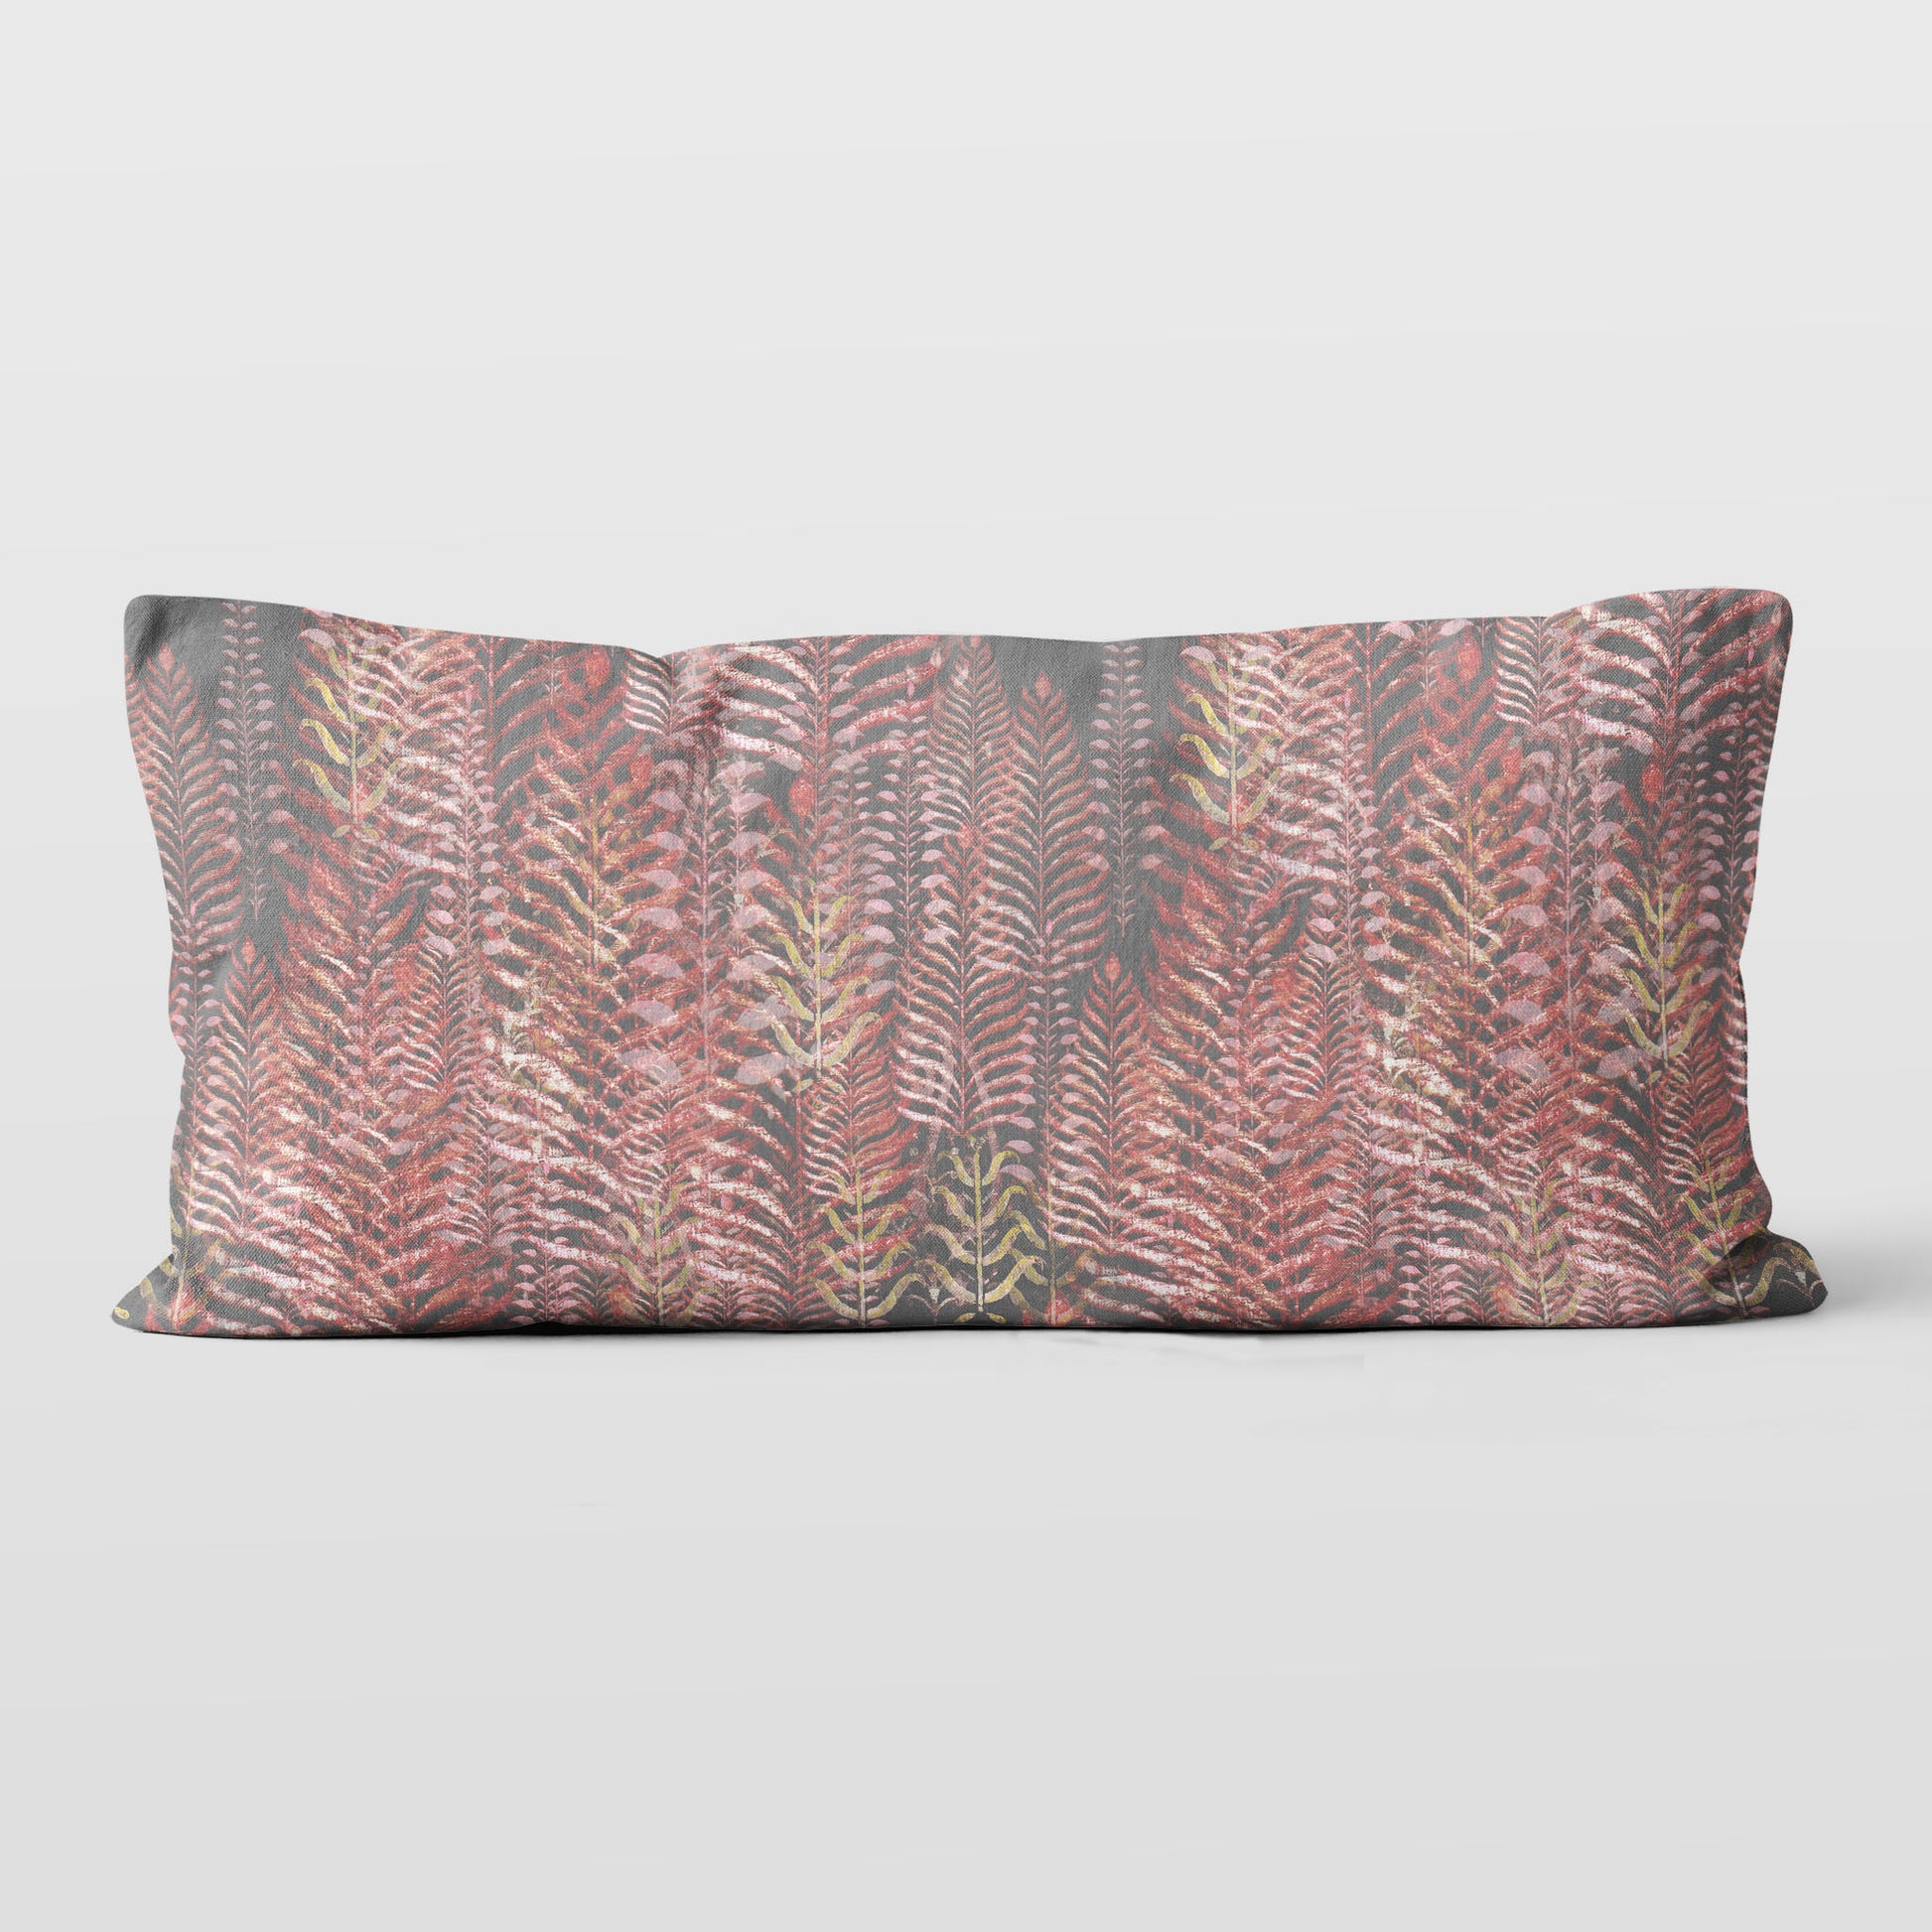 12 x 24 inch lumbar pillow featuring feather block print in pink and gray tones.